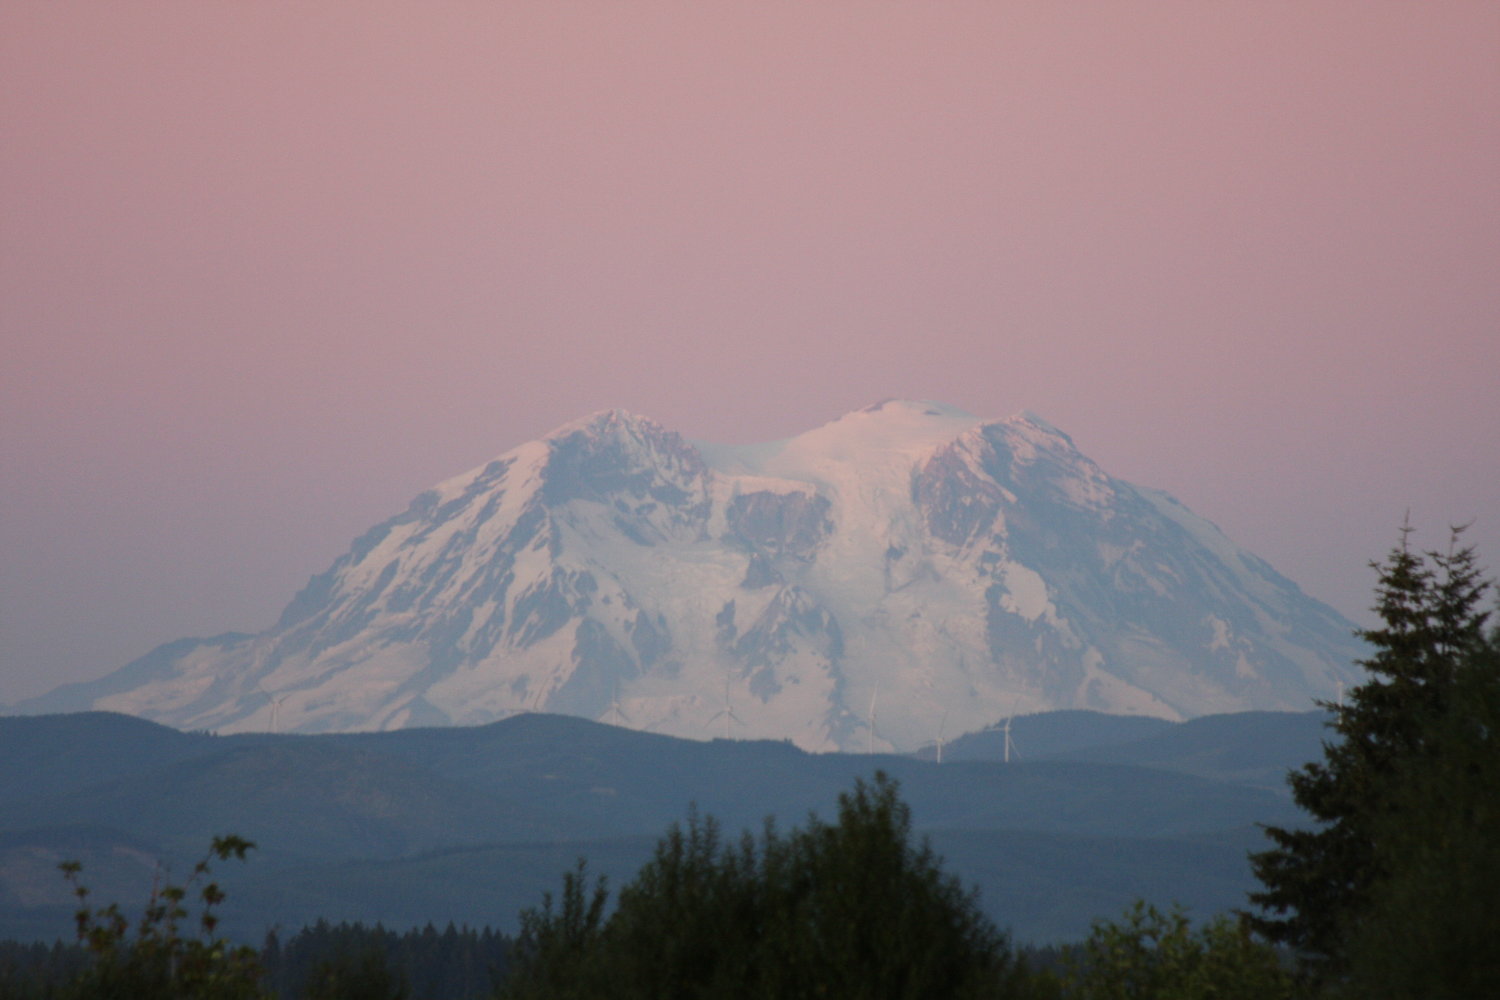 The sky glows pink Friday afternoon at sunset as Mount Rainier dominates the landscape from this vantage point just outside of Chehalis.